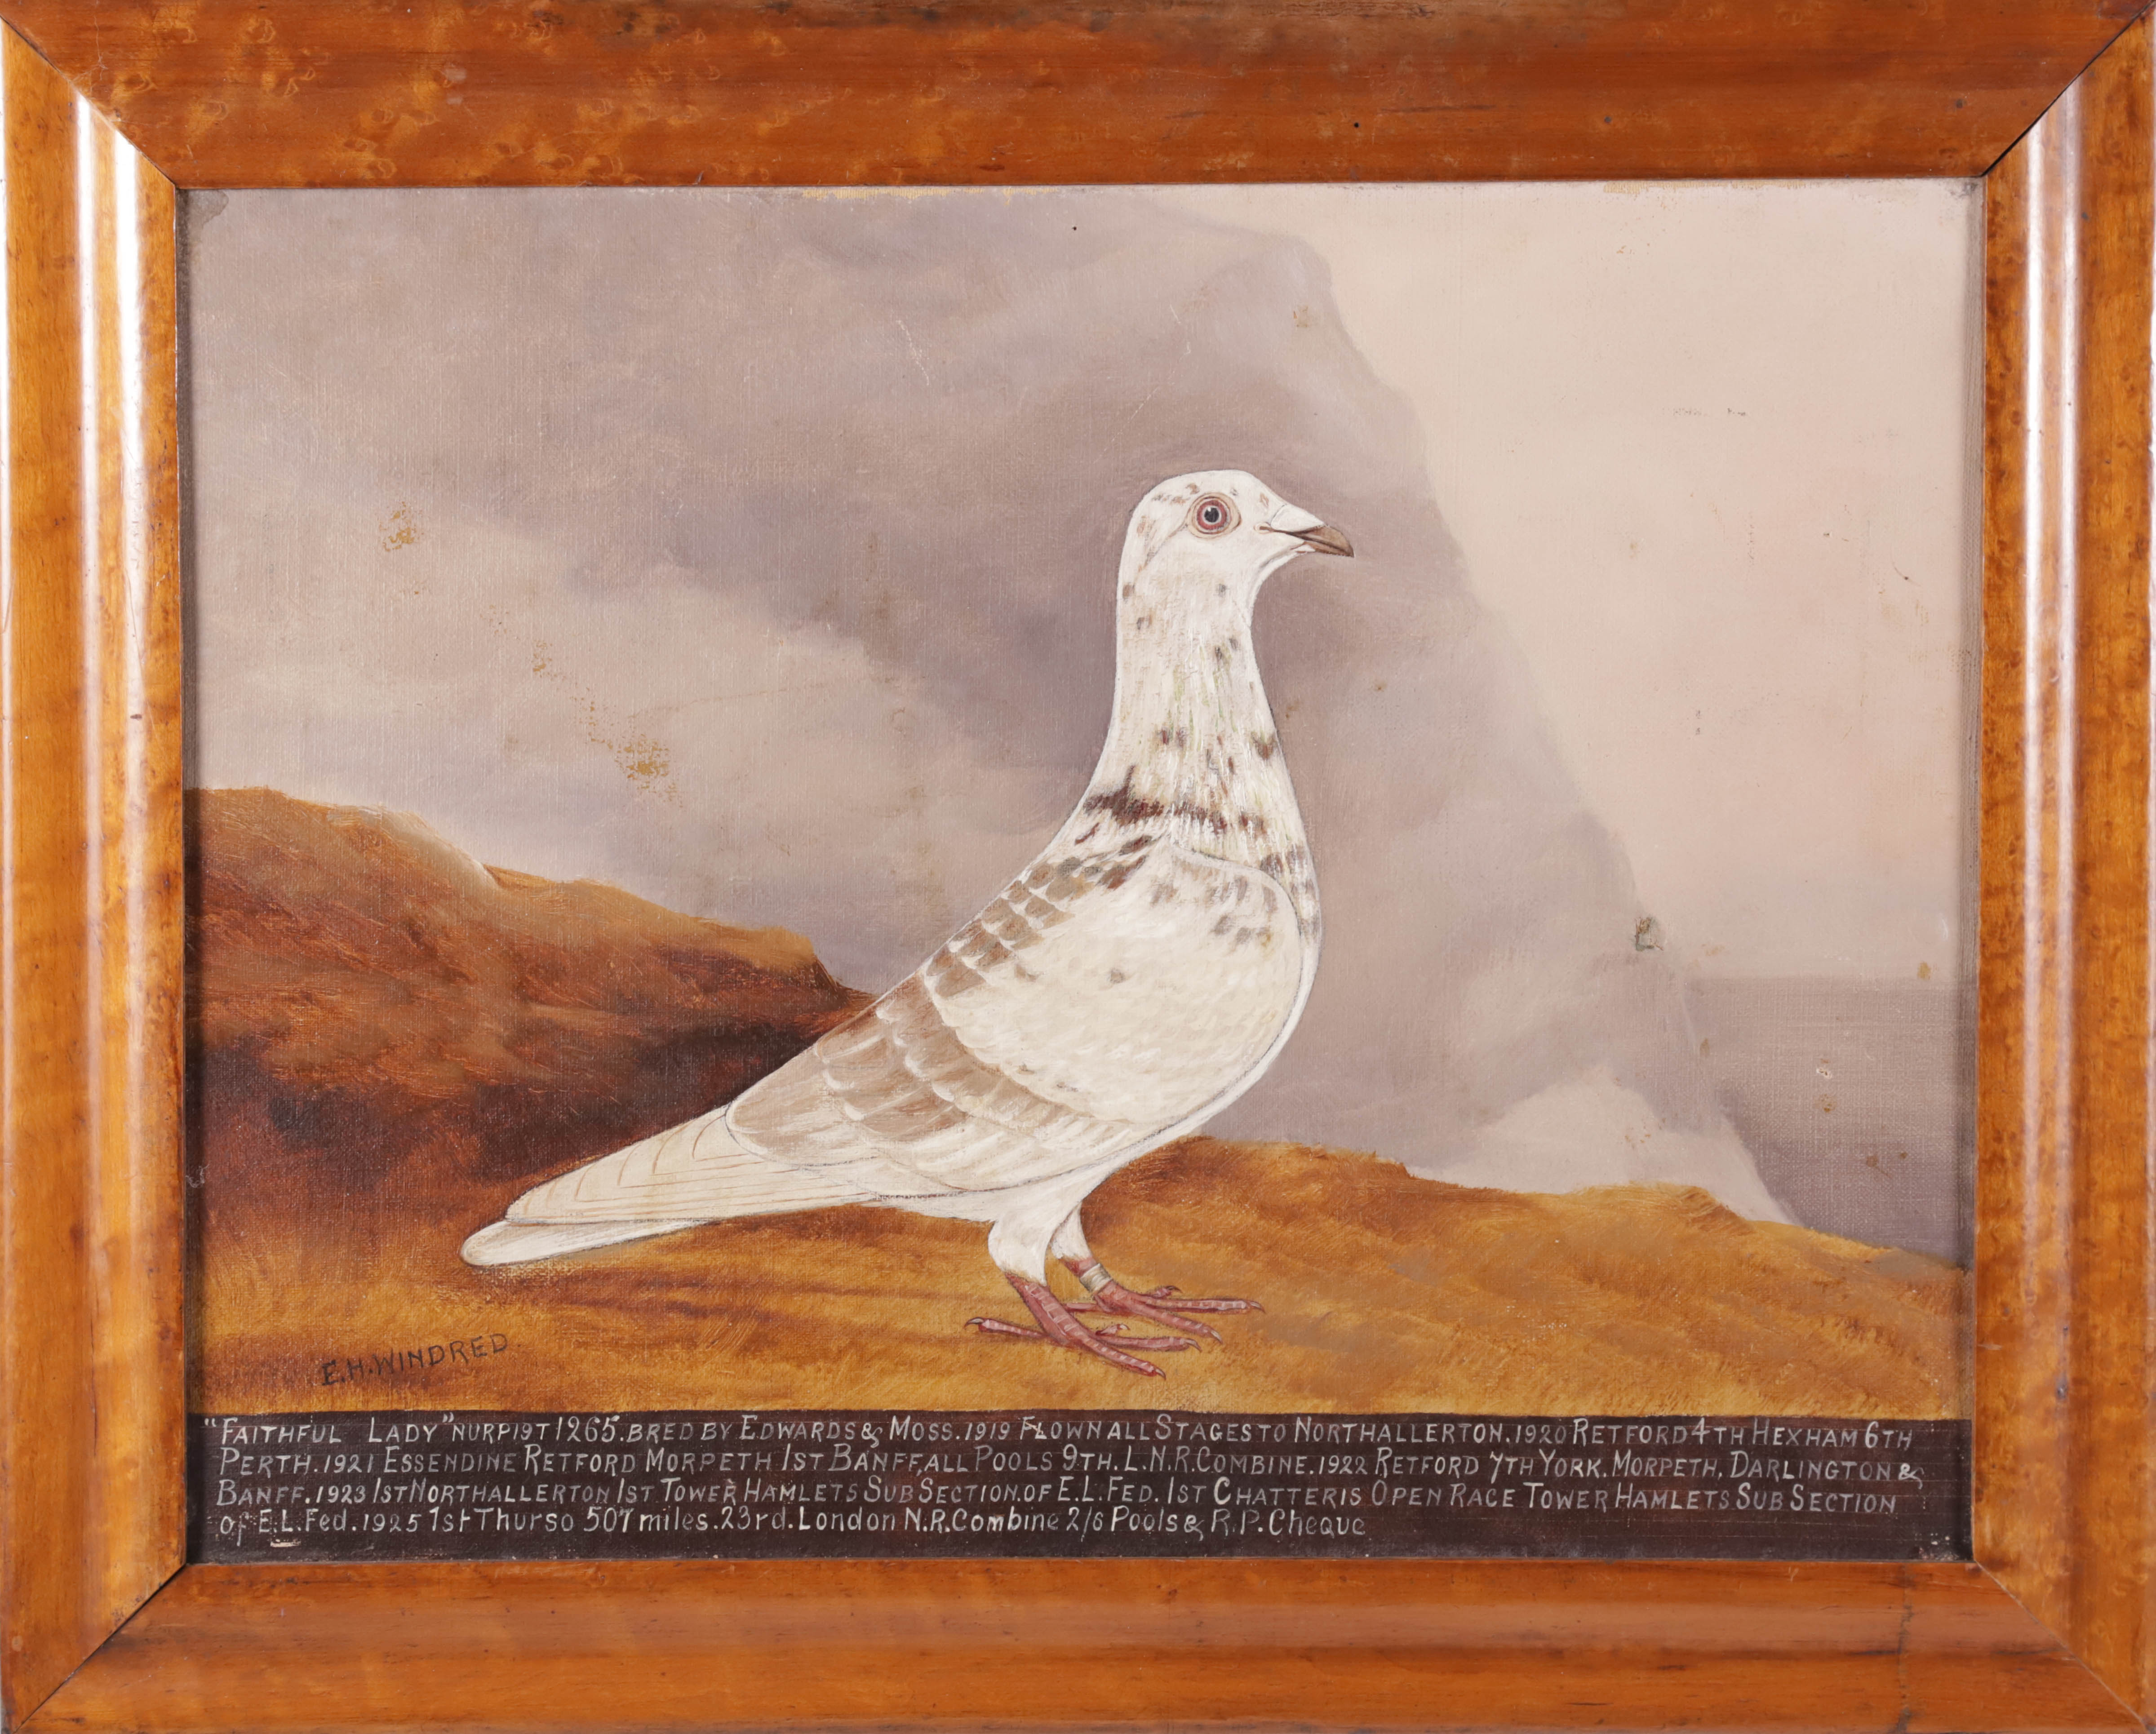 Edward Henry Windred Oil on Canvas "Portrait of the Champion Racing Pigeon Faithful Lady"